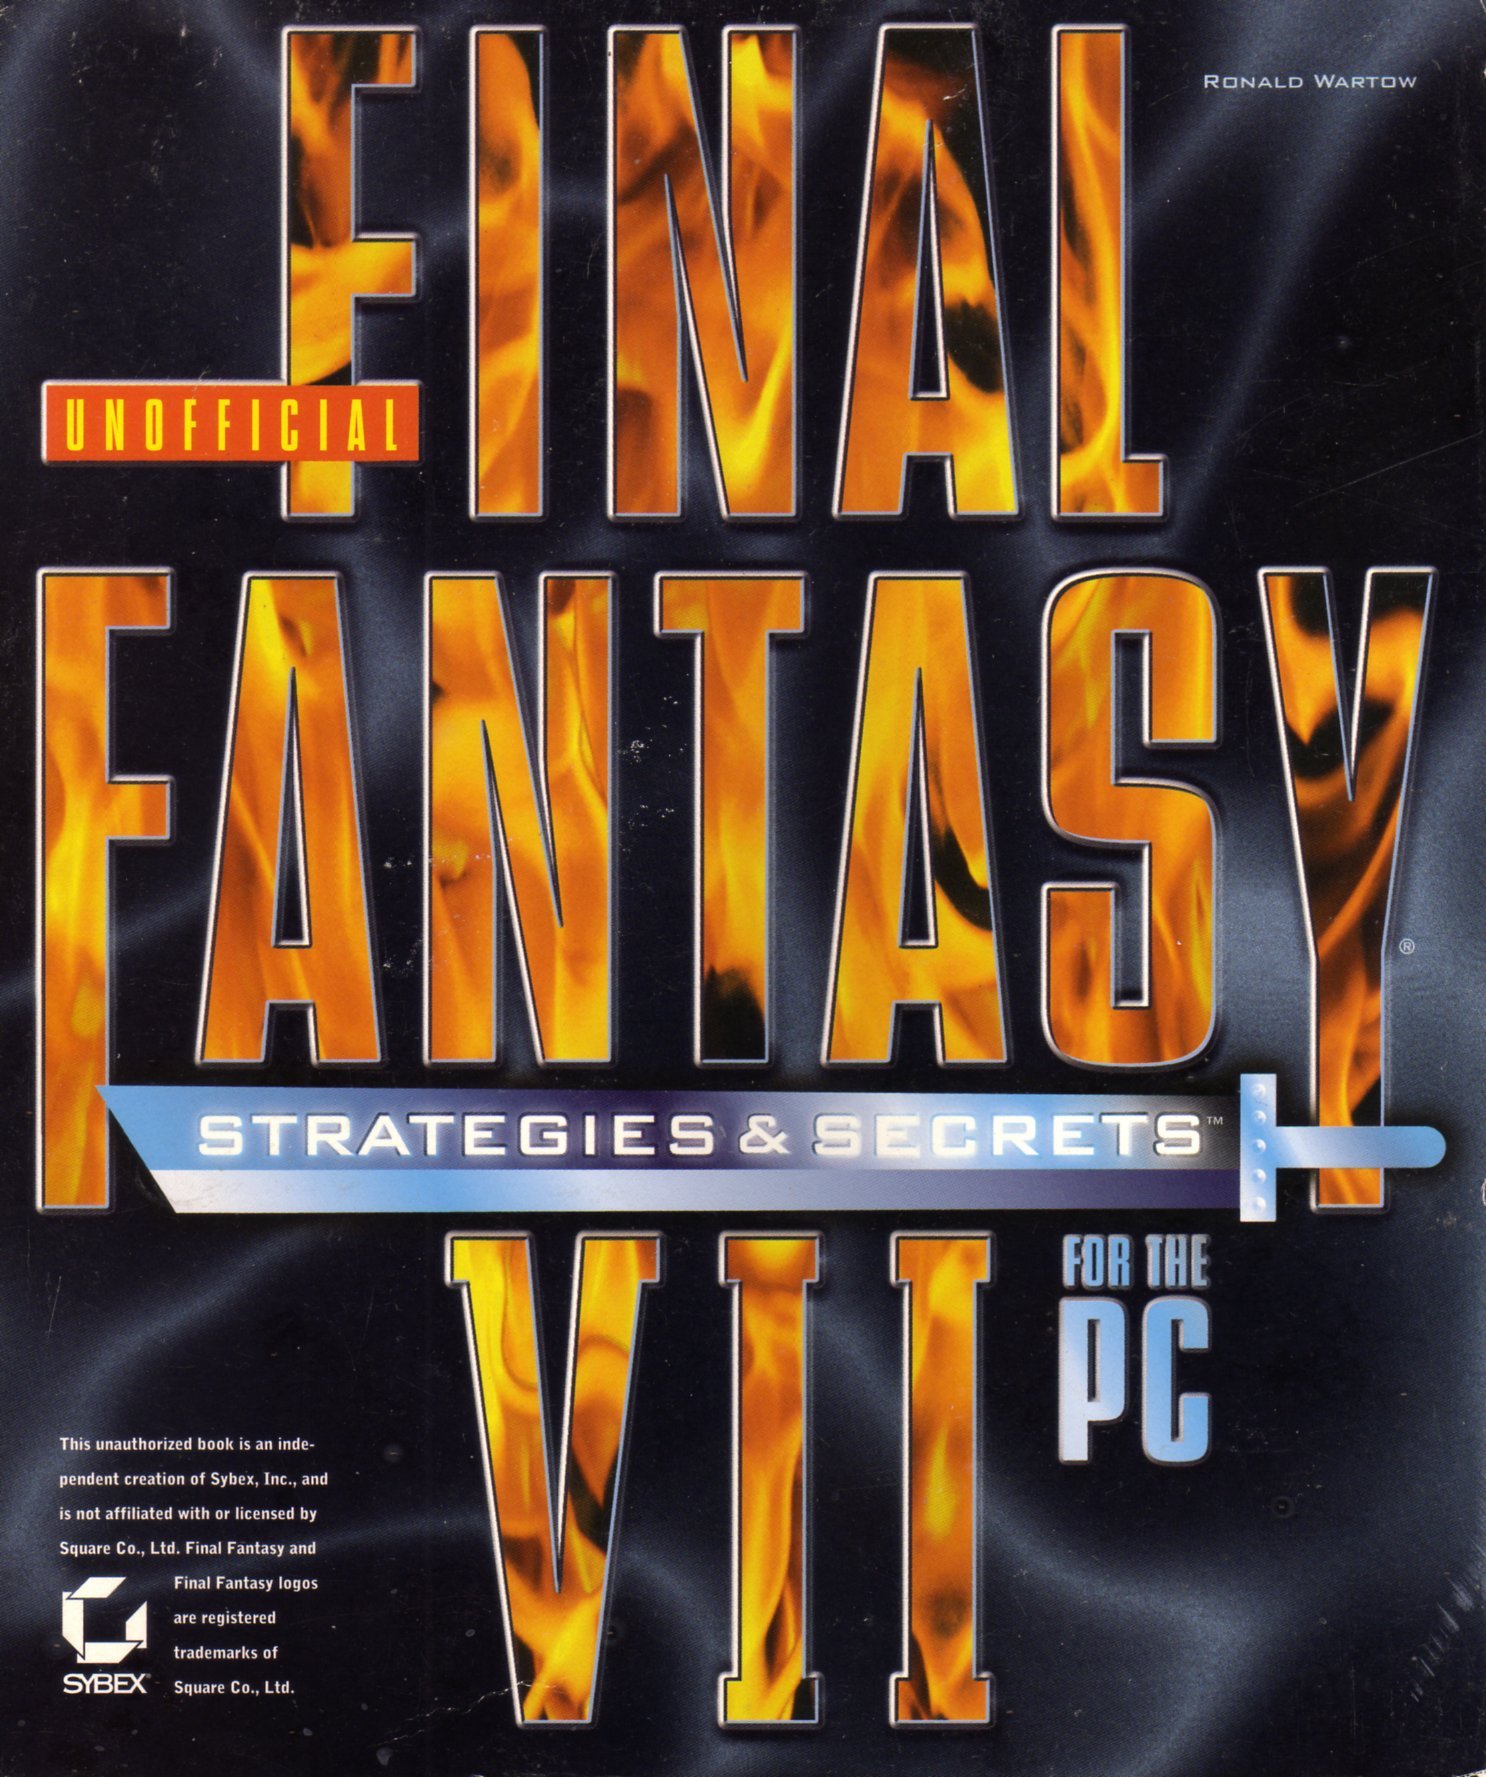 Final Fantasy VII Unofficial Strategies & Secrets for the PC